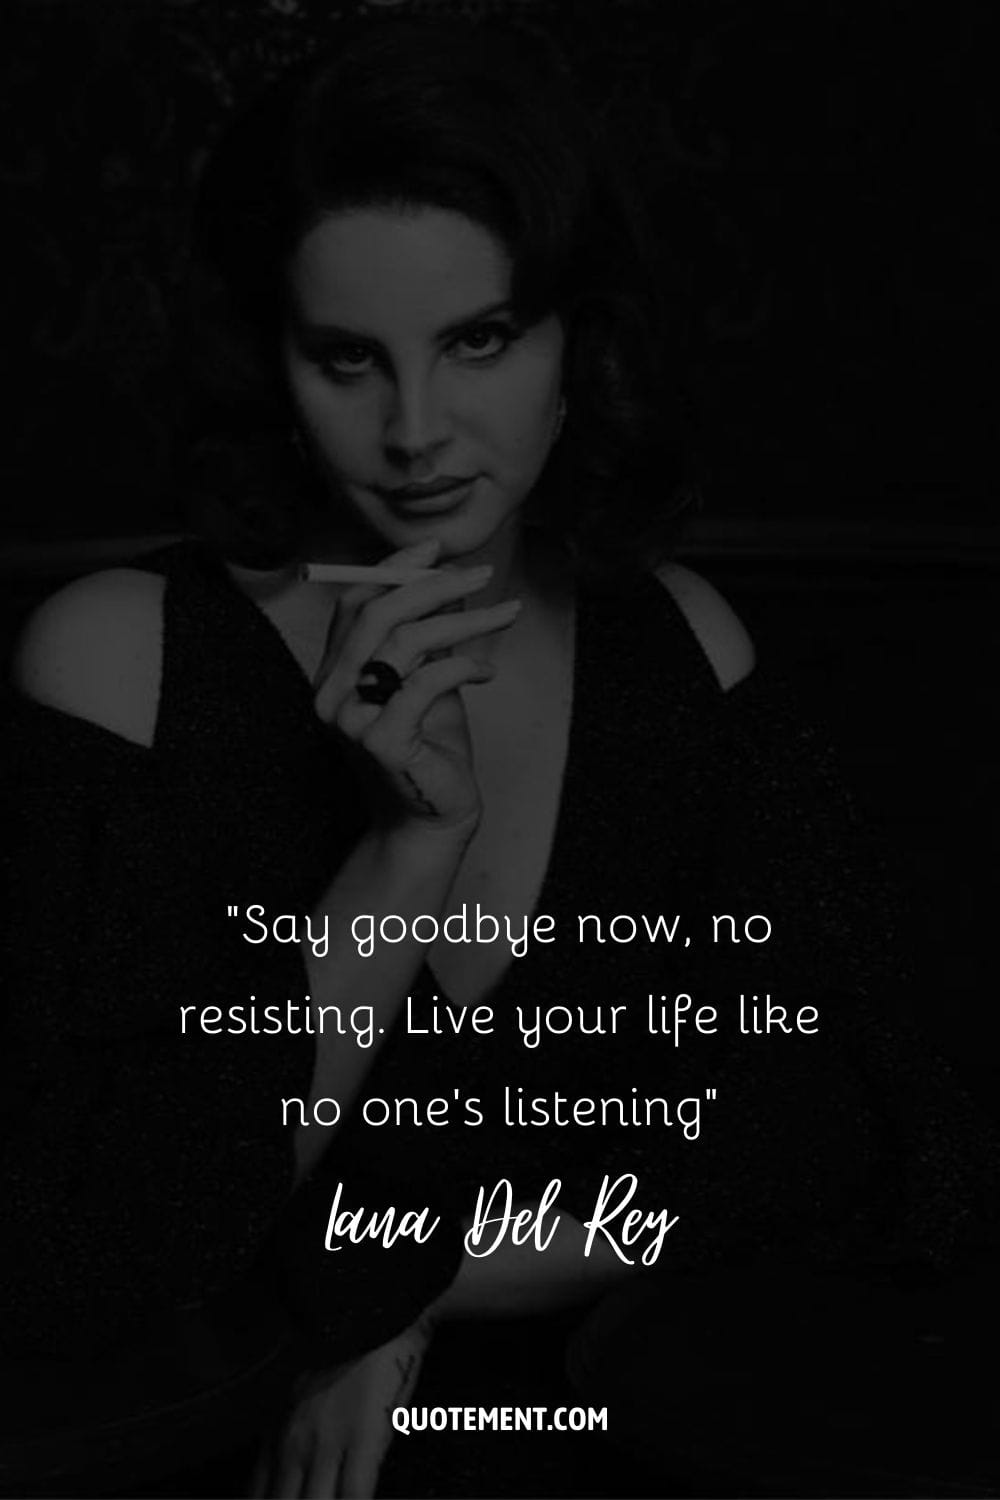 Say goodbye now, no resisting. Live your life like no one's listening